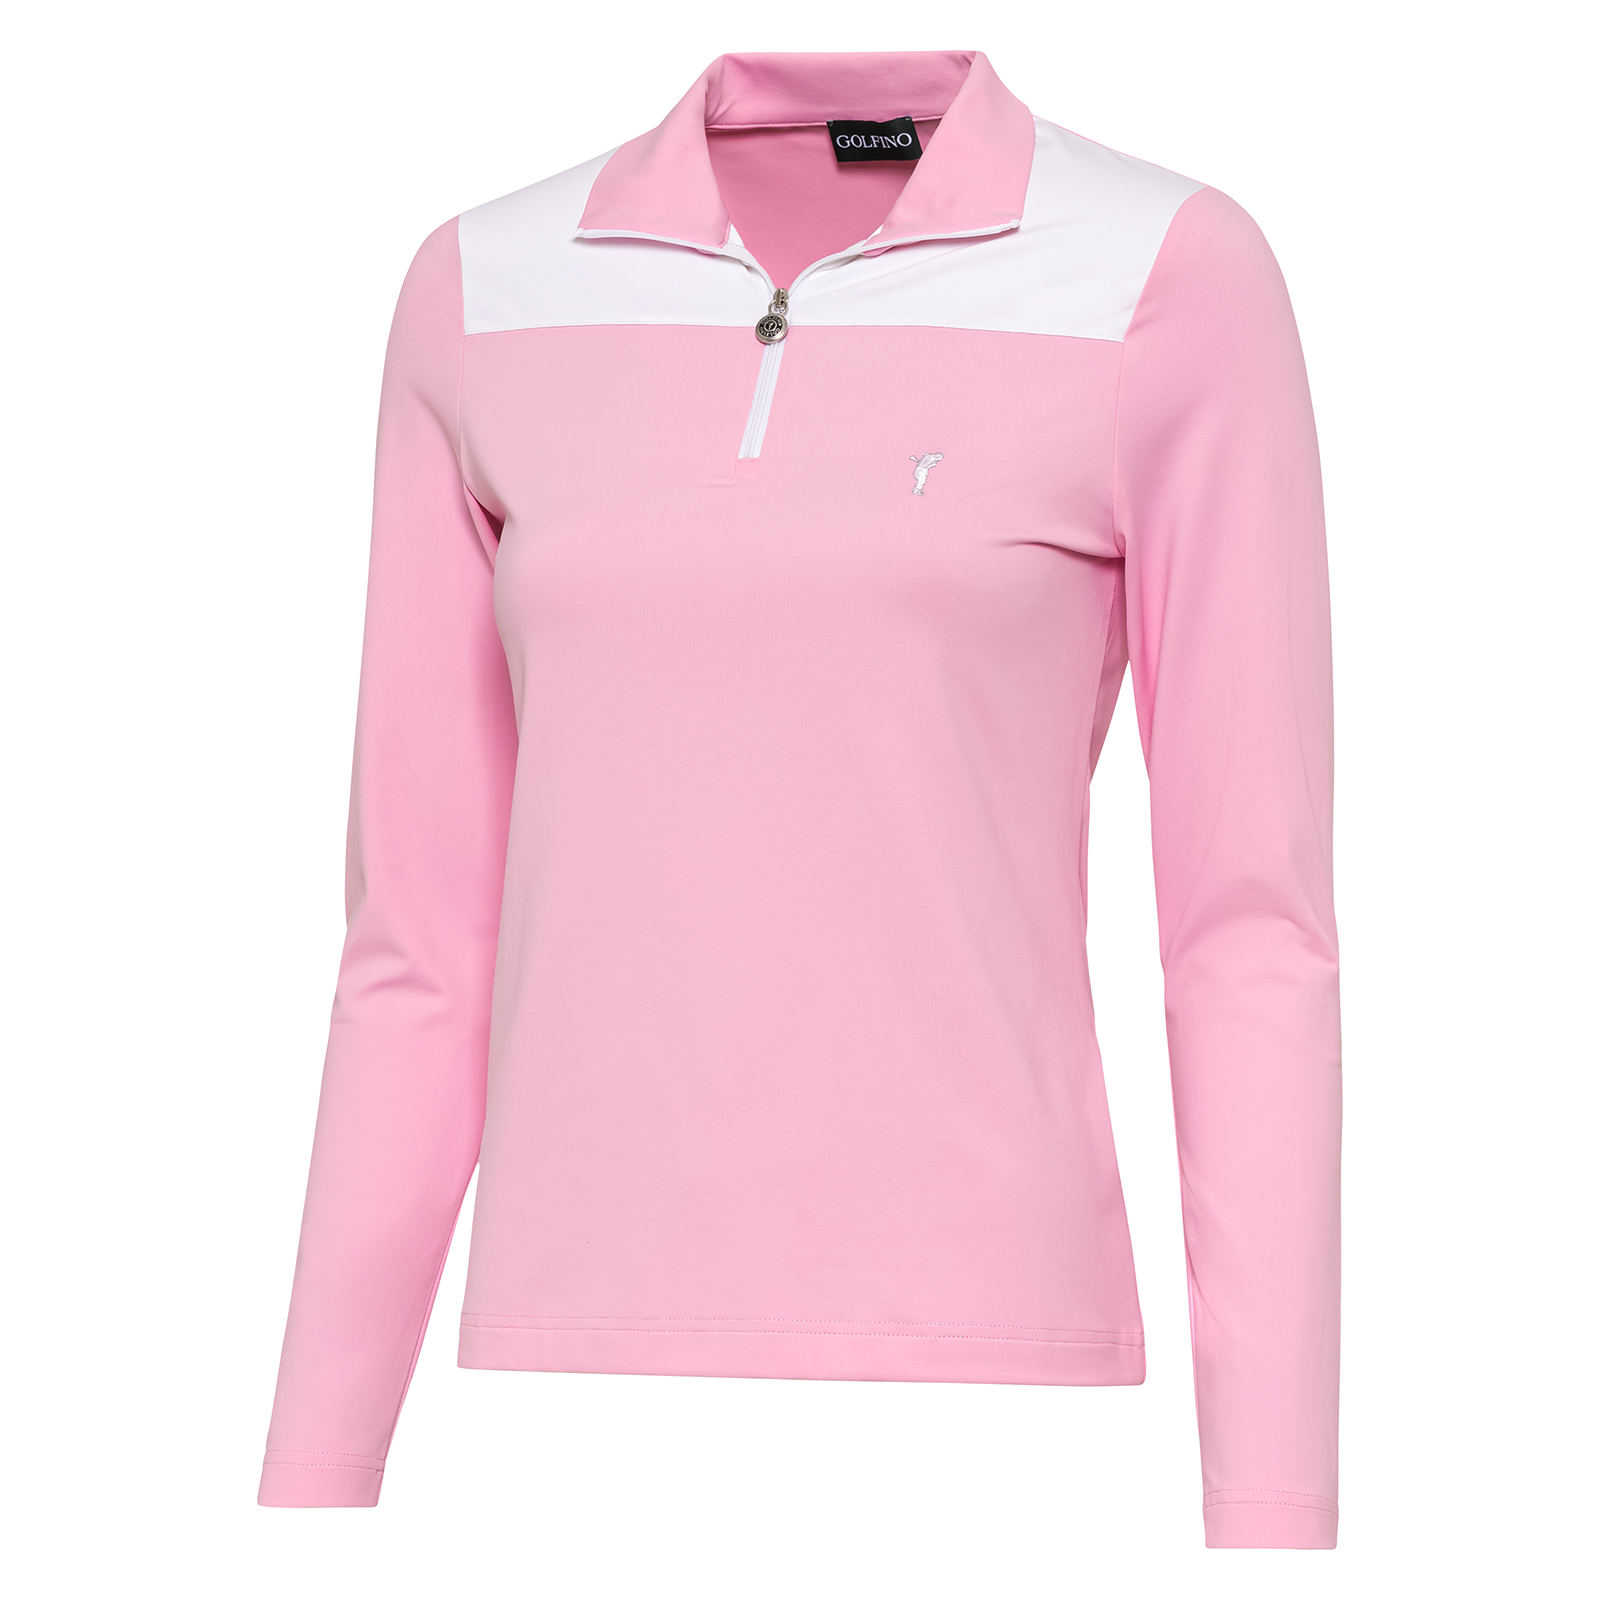 Ladies' long-sleeved polo shirt with colour blocking